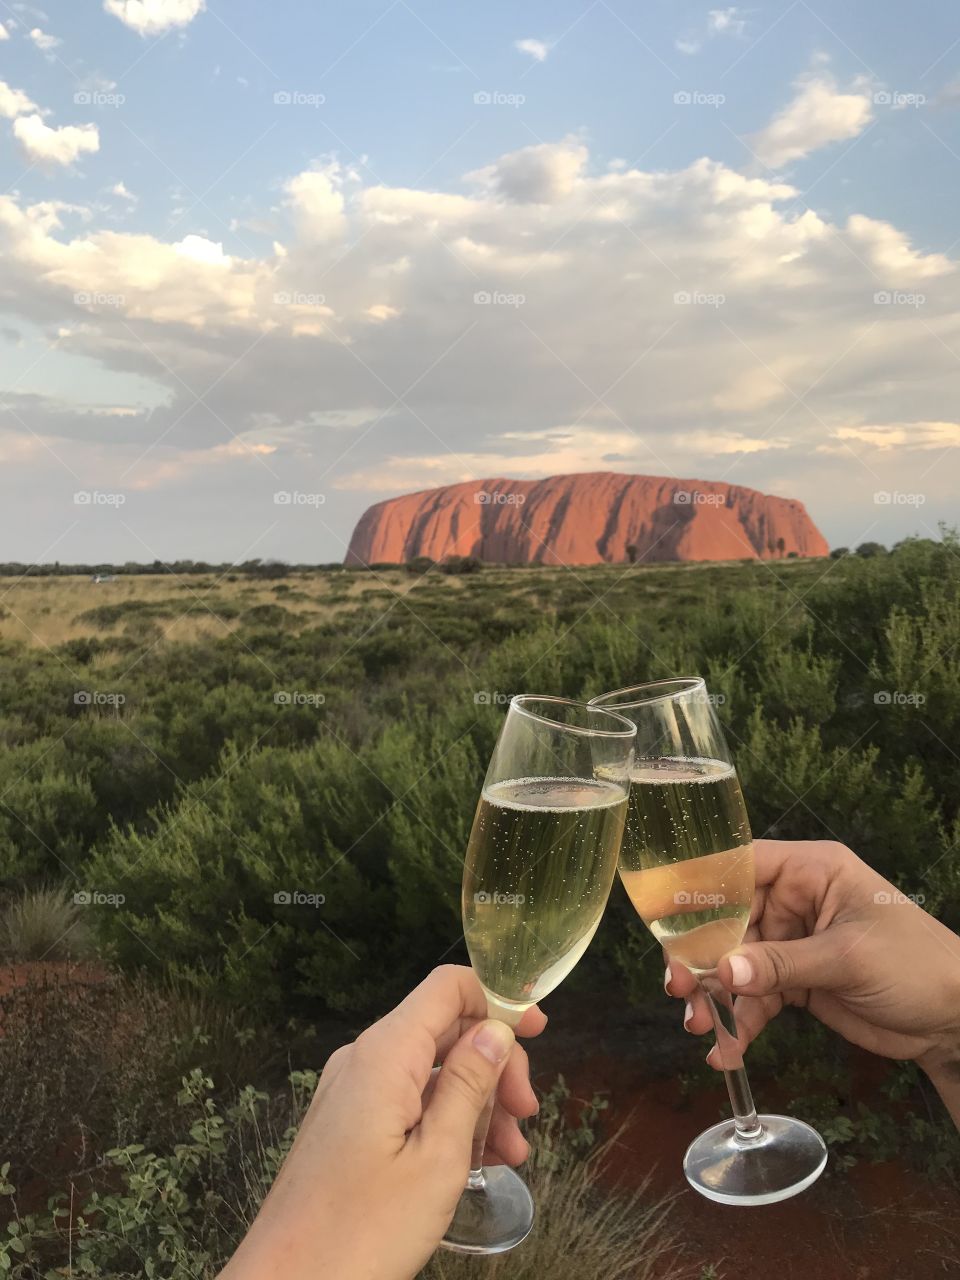 Cheers to the Outback. A champagne toast at sunset at Ayers Rock/Uluru in the Australian Outback.